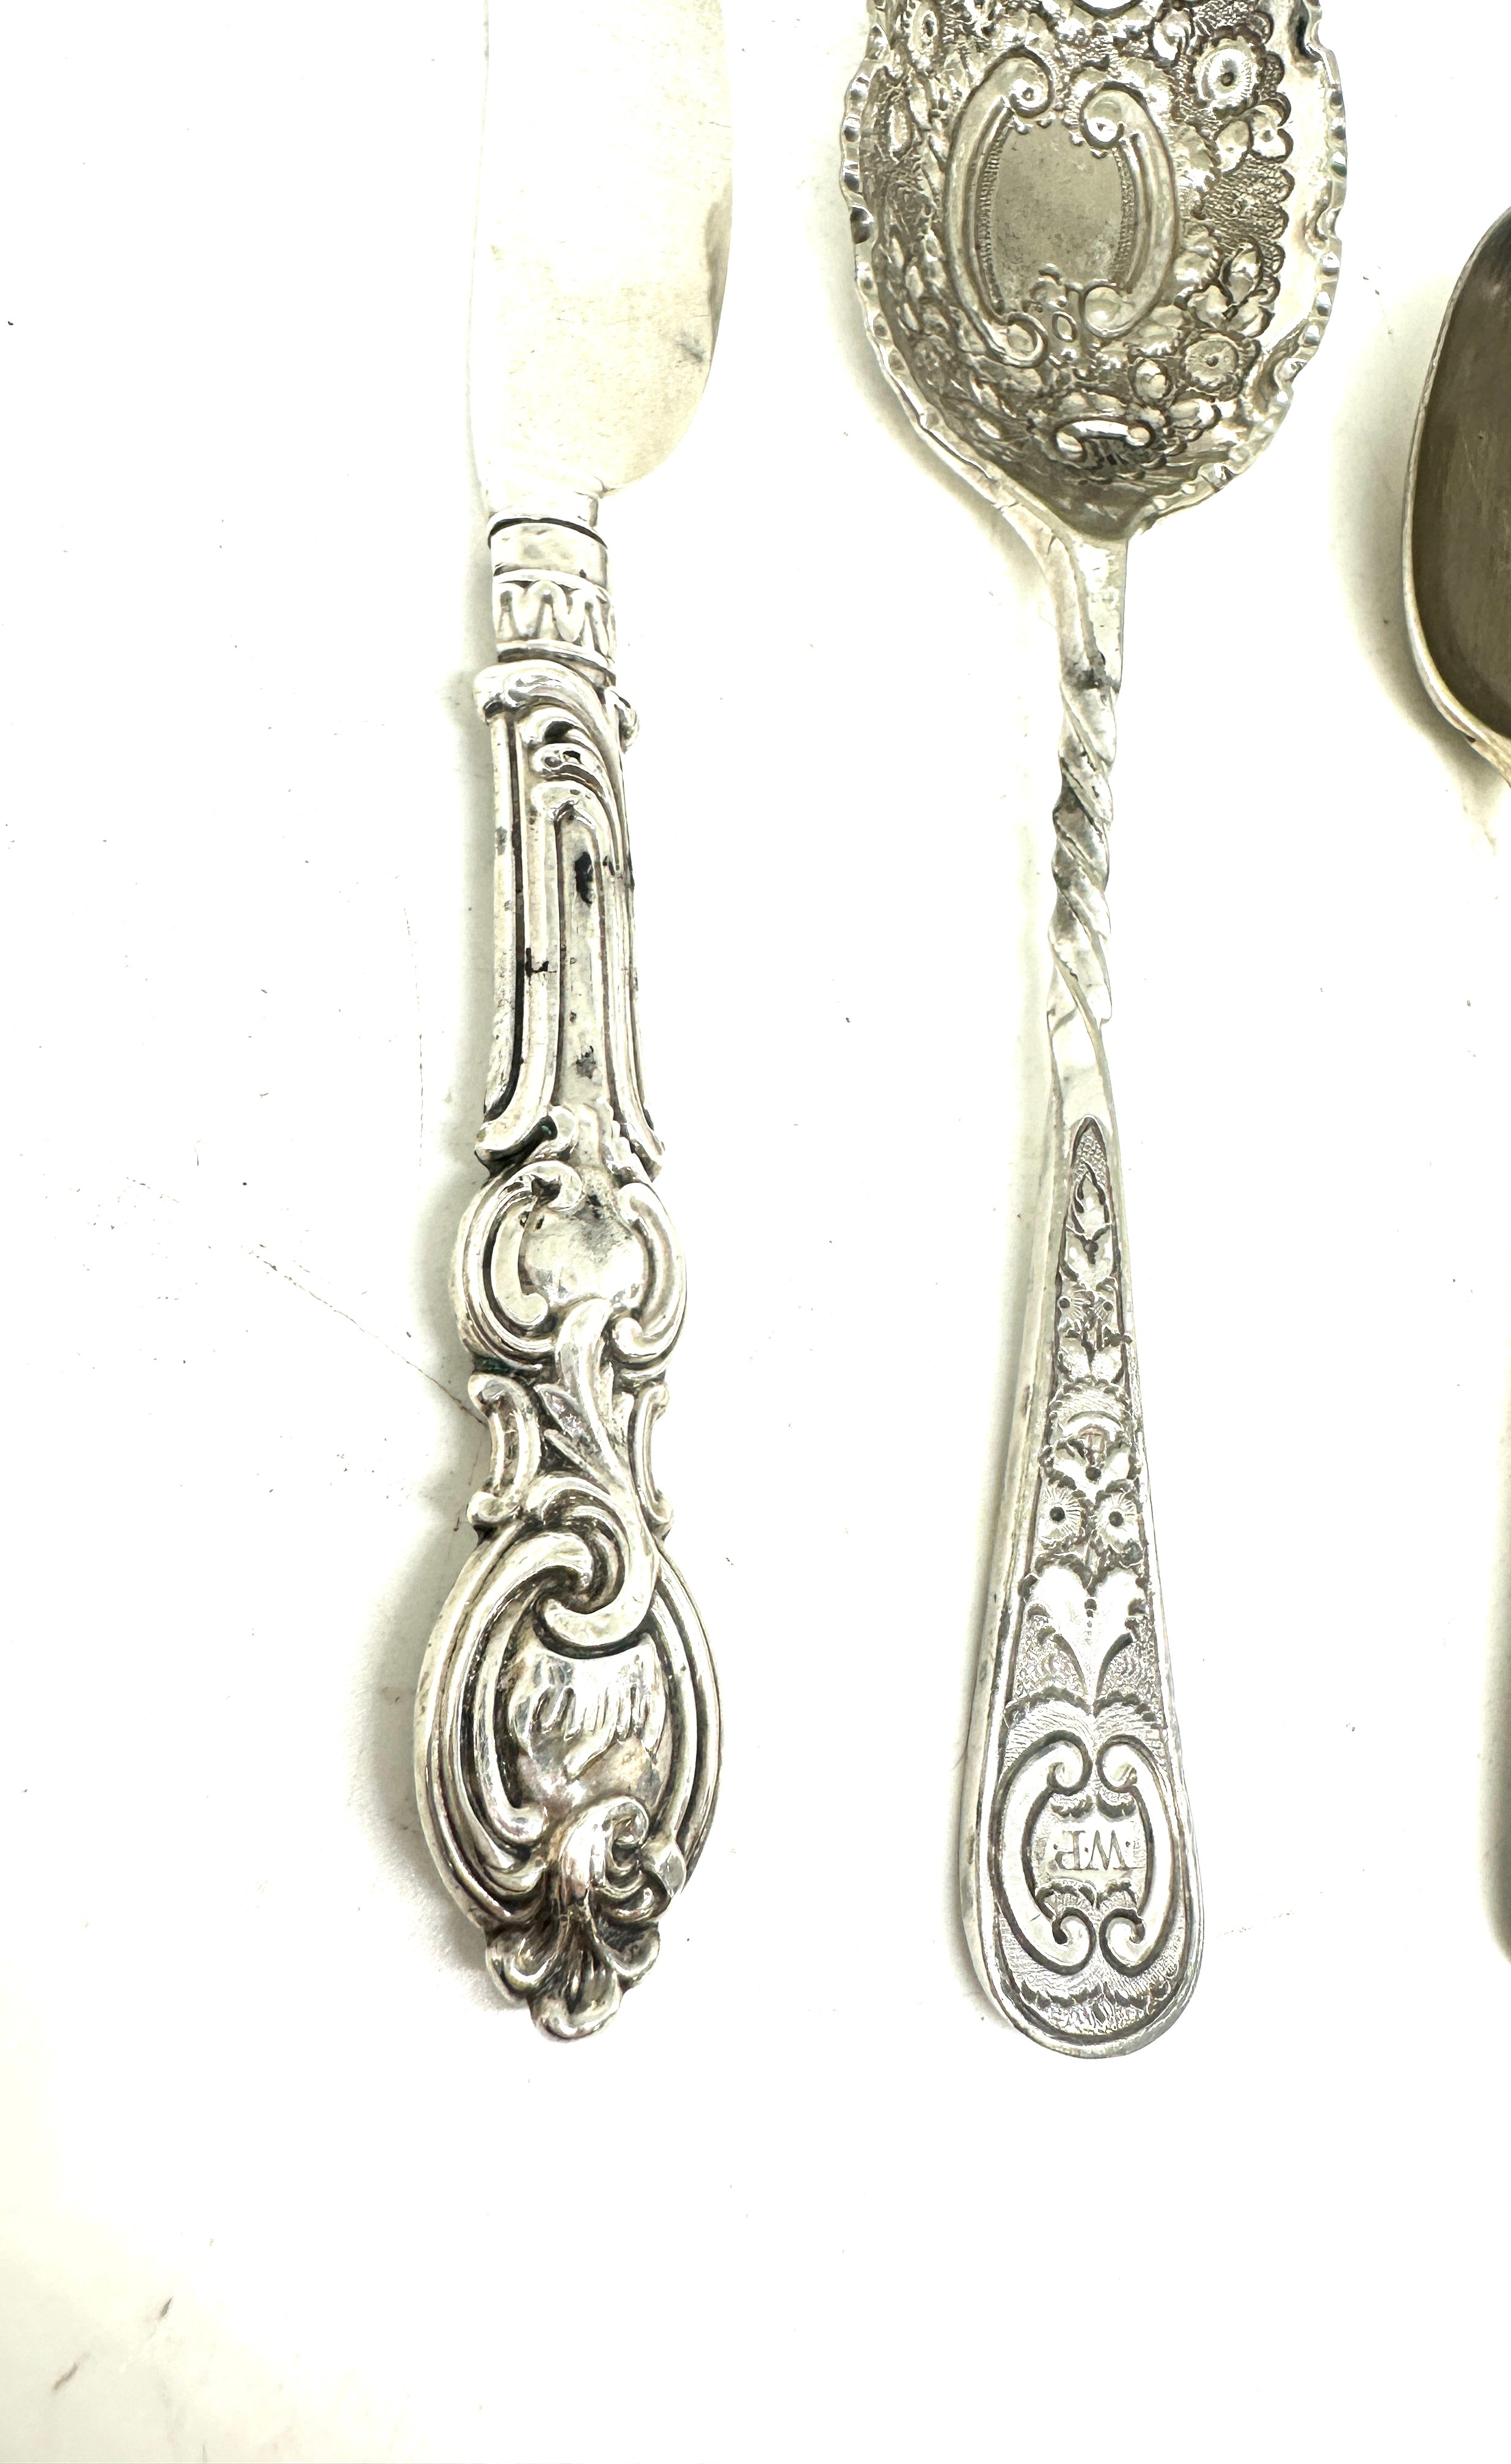 2 Silver spoons and a silver butter knife with 1 other, total silver weight 62 grams - Image 2 of 7